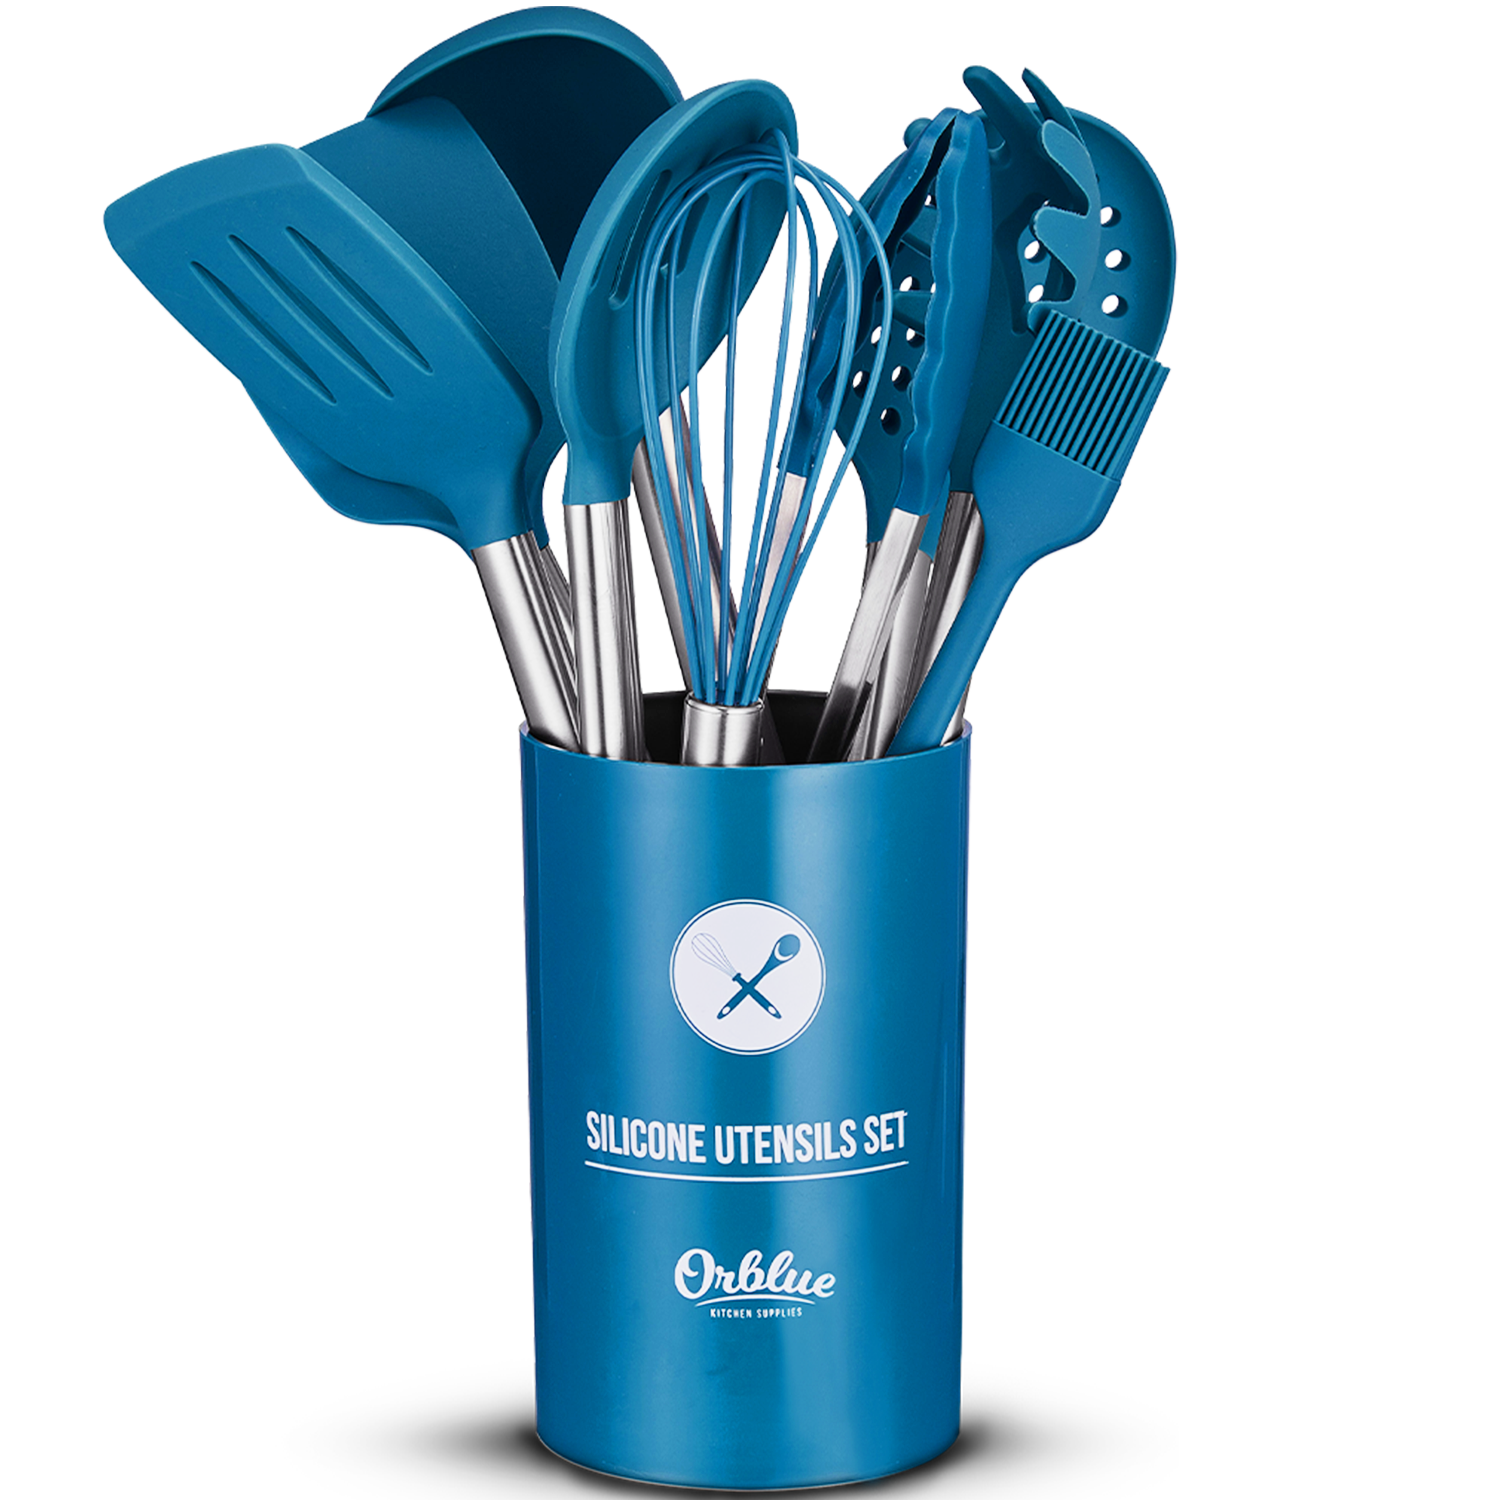 ORBLUE 14-piece Silicone Kitchen Utensil Set with Caddy for Storage – Orblue